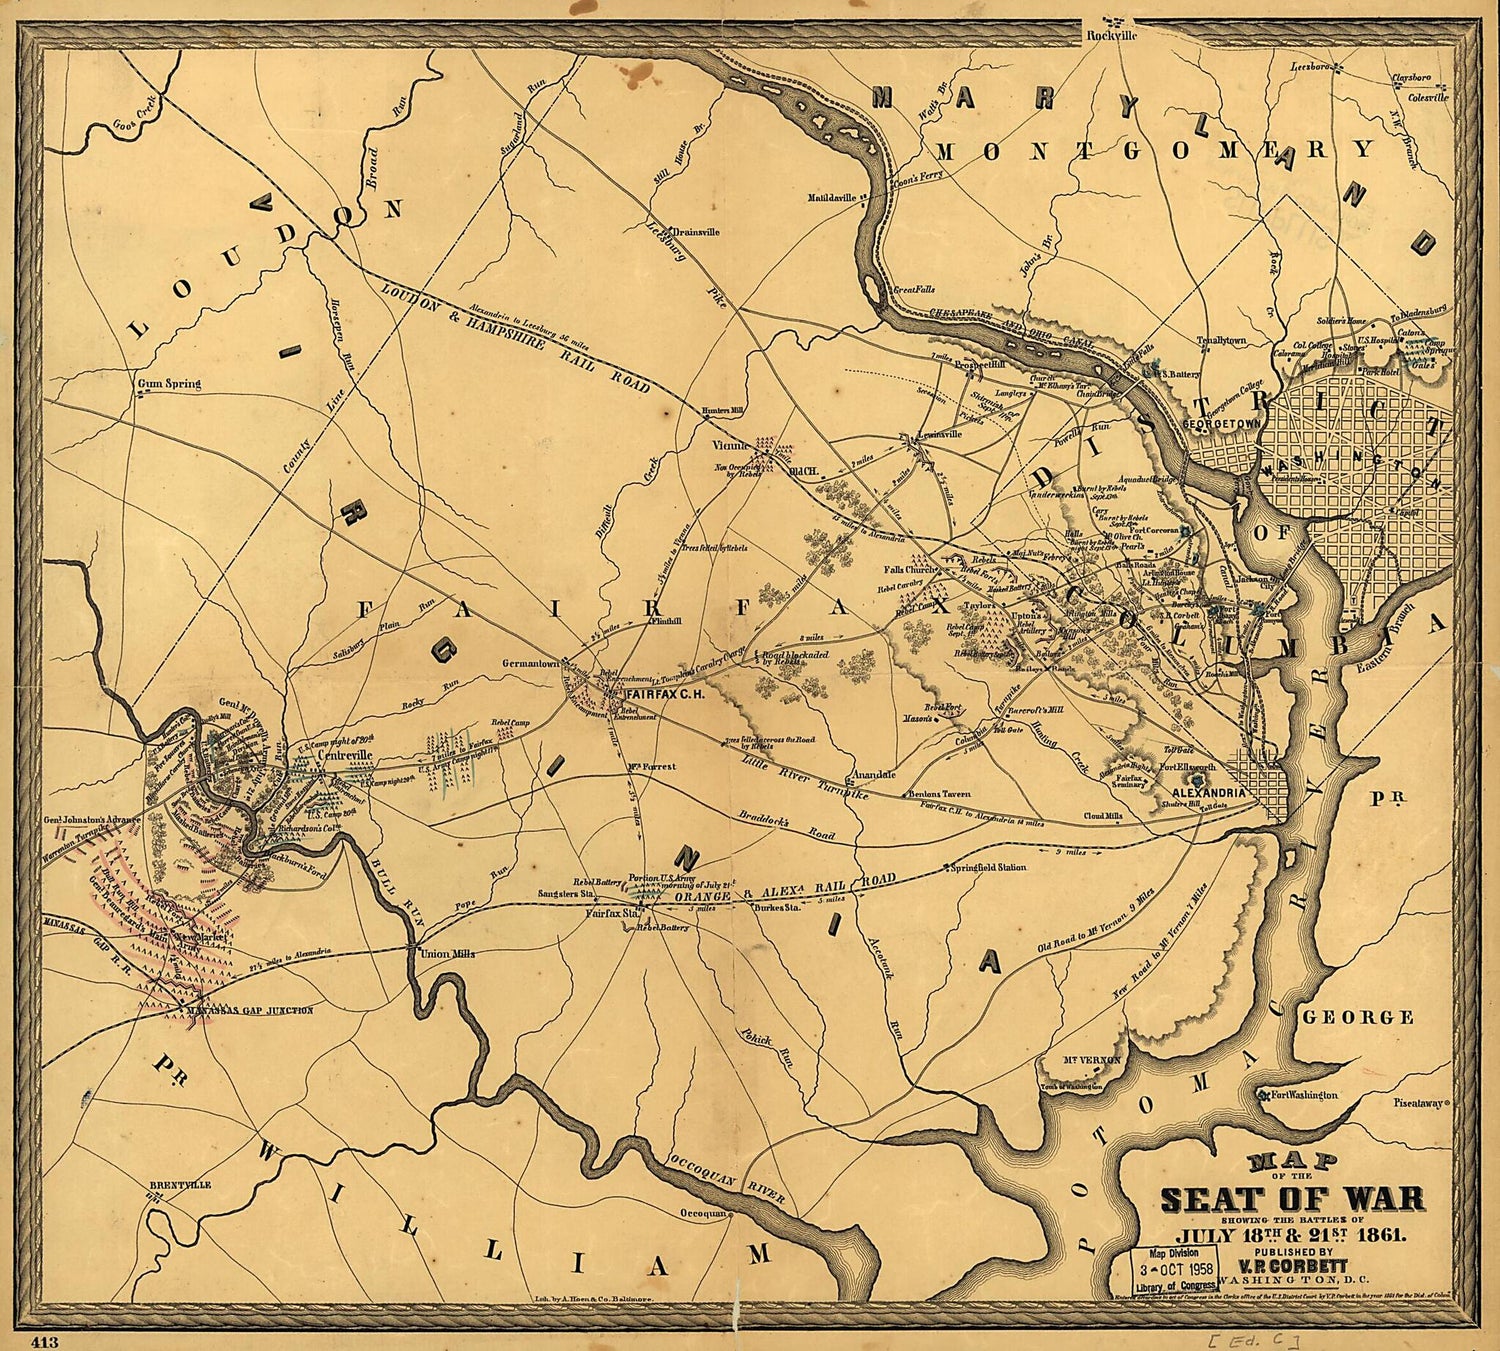 This old map of Map of the Seat of War Showing the Battles of July 18th &amp; 21st from 1861 was created by V. P. Corbett in 1861